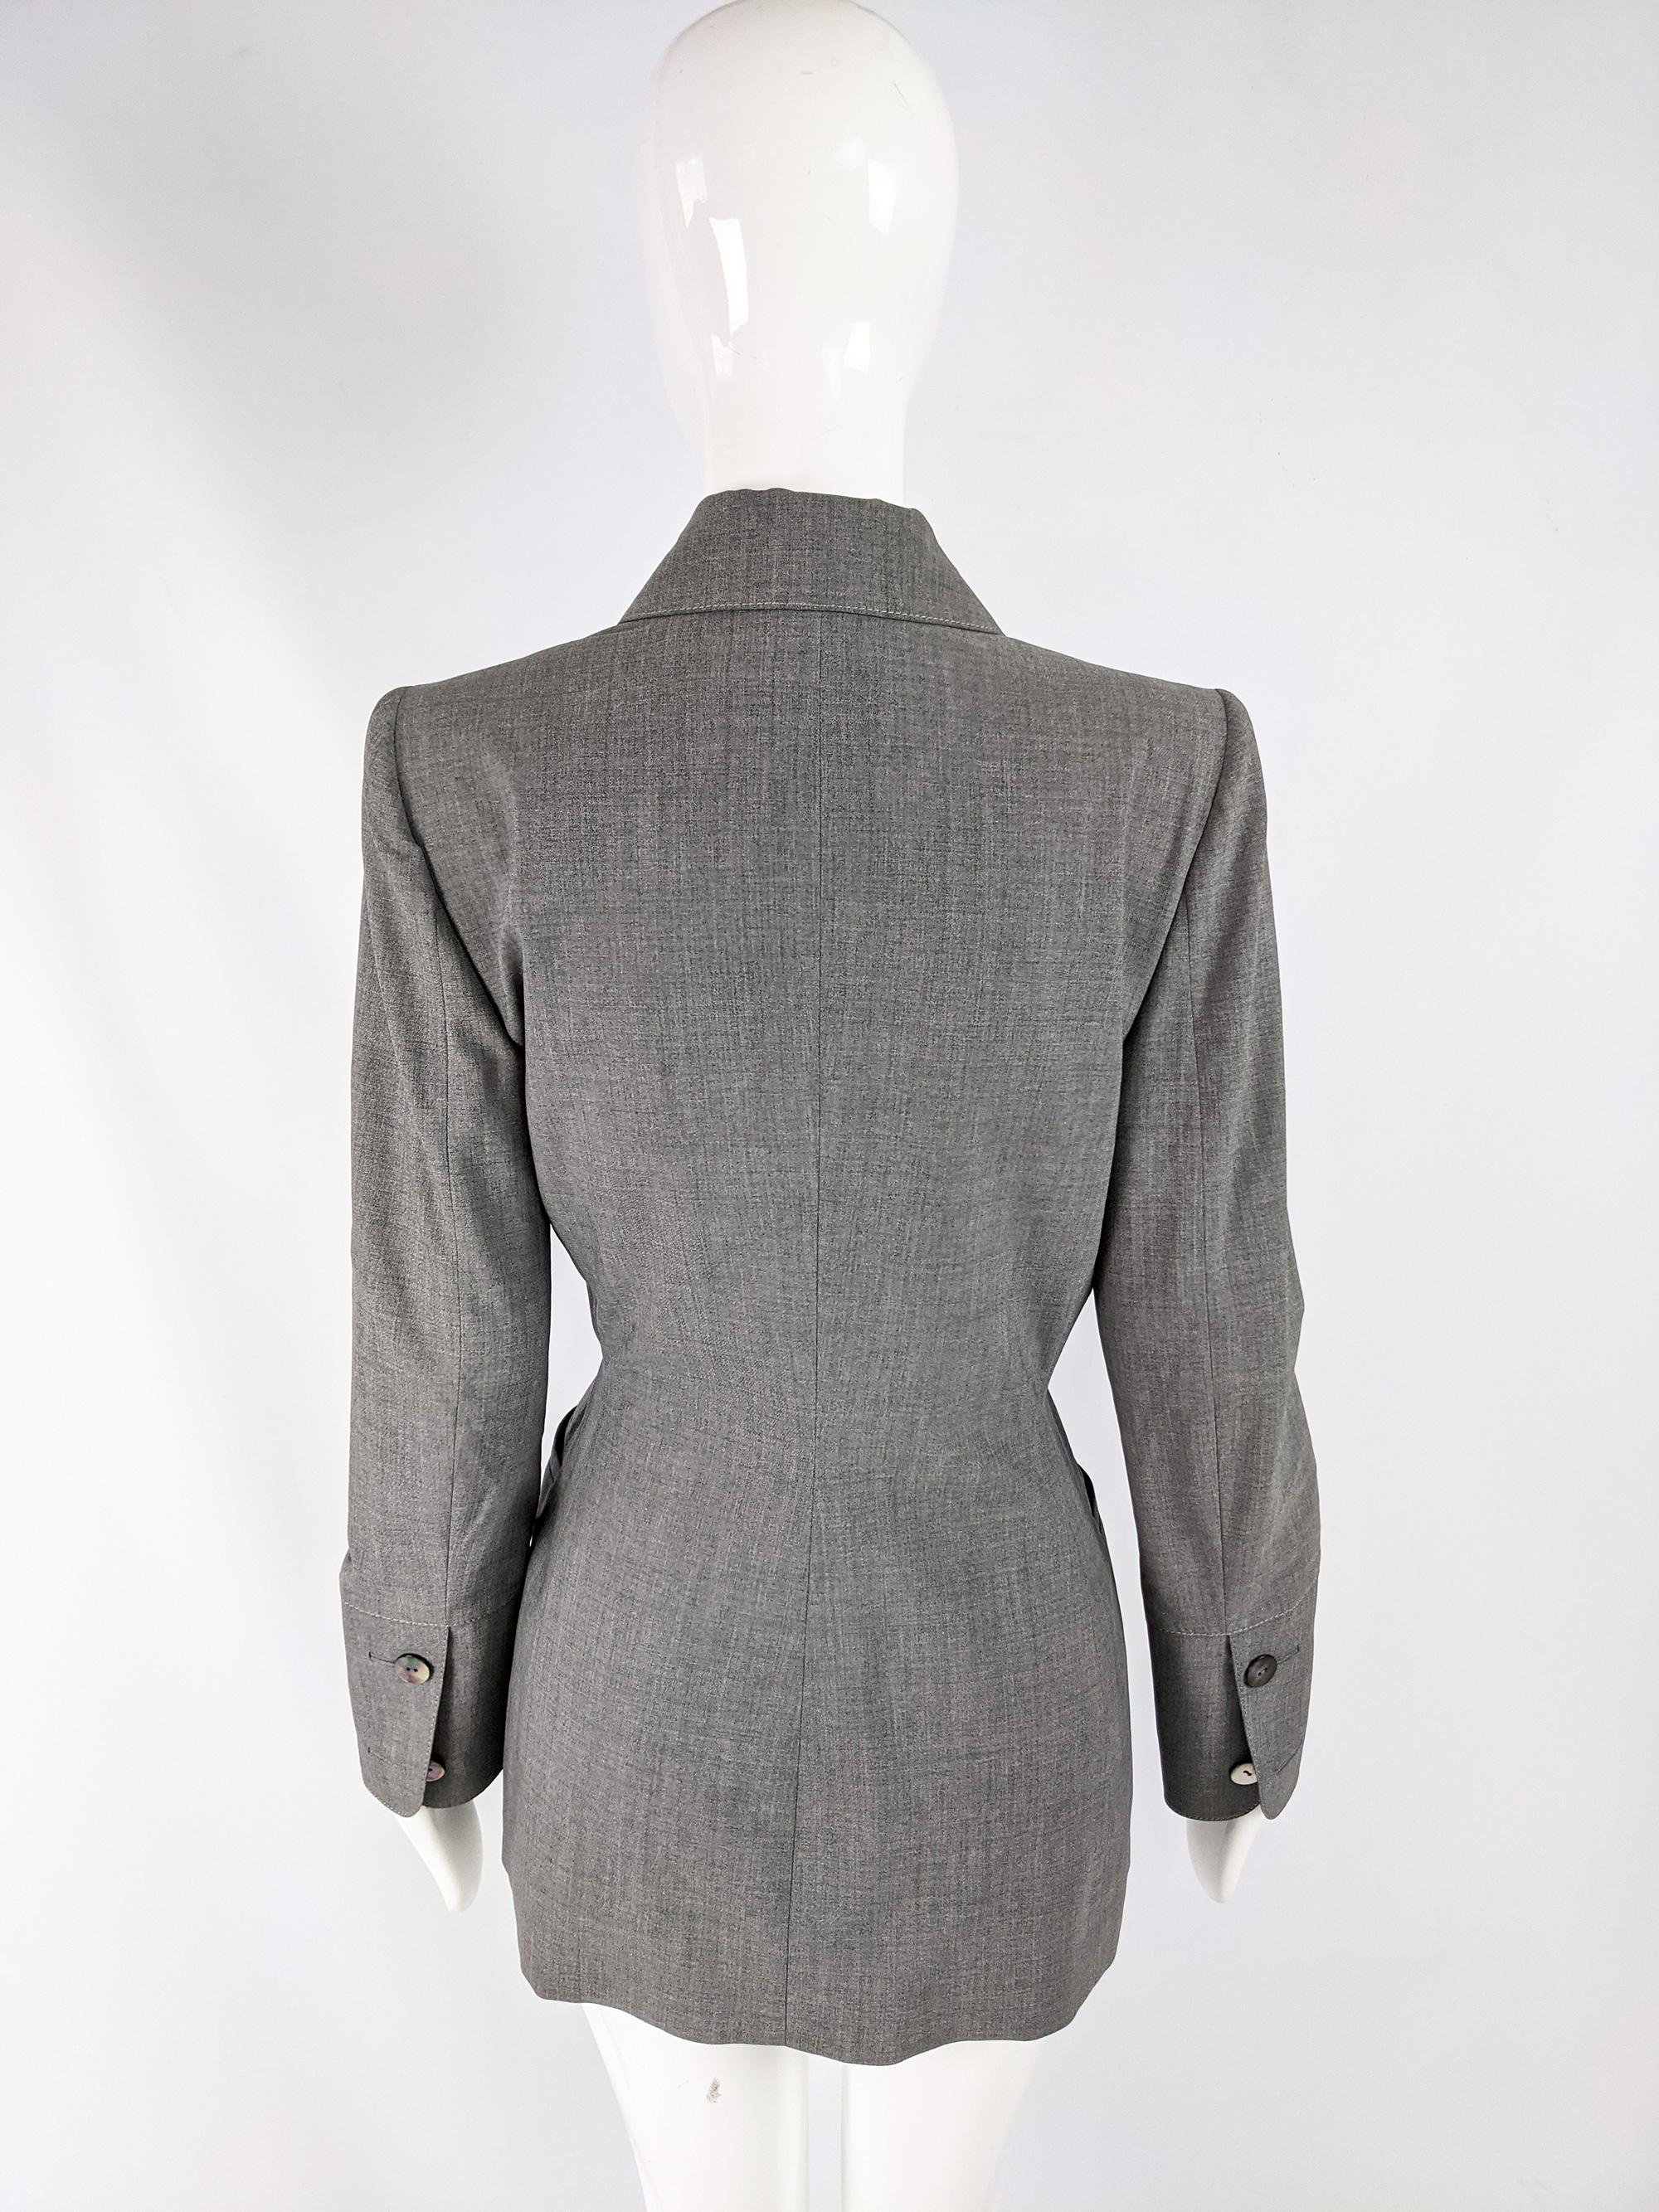 Gai Mattiolo Vintage Womens Grey Wool Asymmetric Blazer Jacket In Excellent Condition For Sale In Doncaster, South Yorkshire